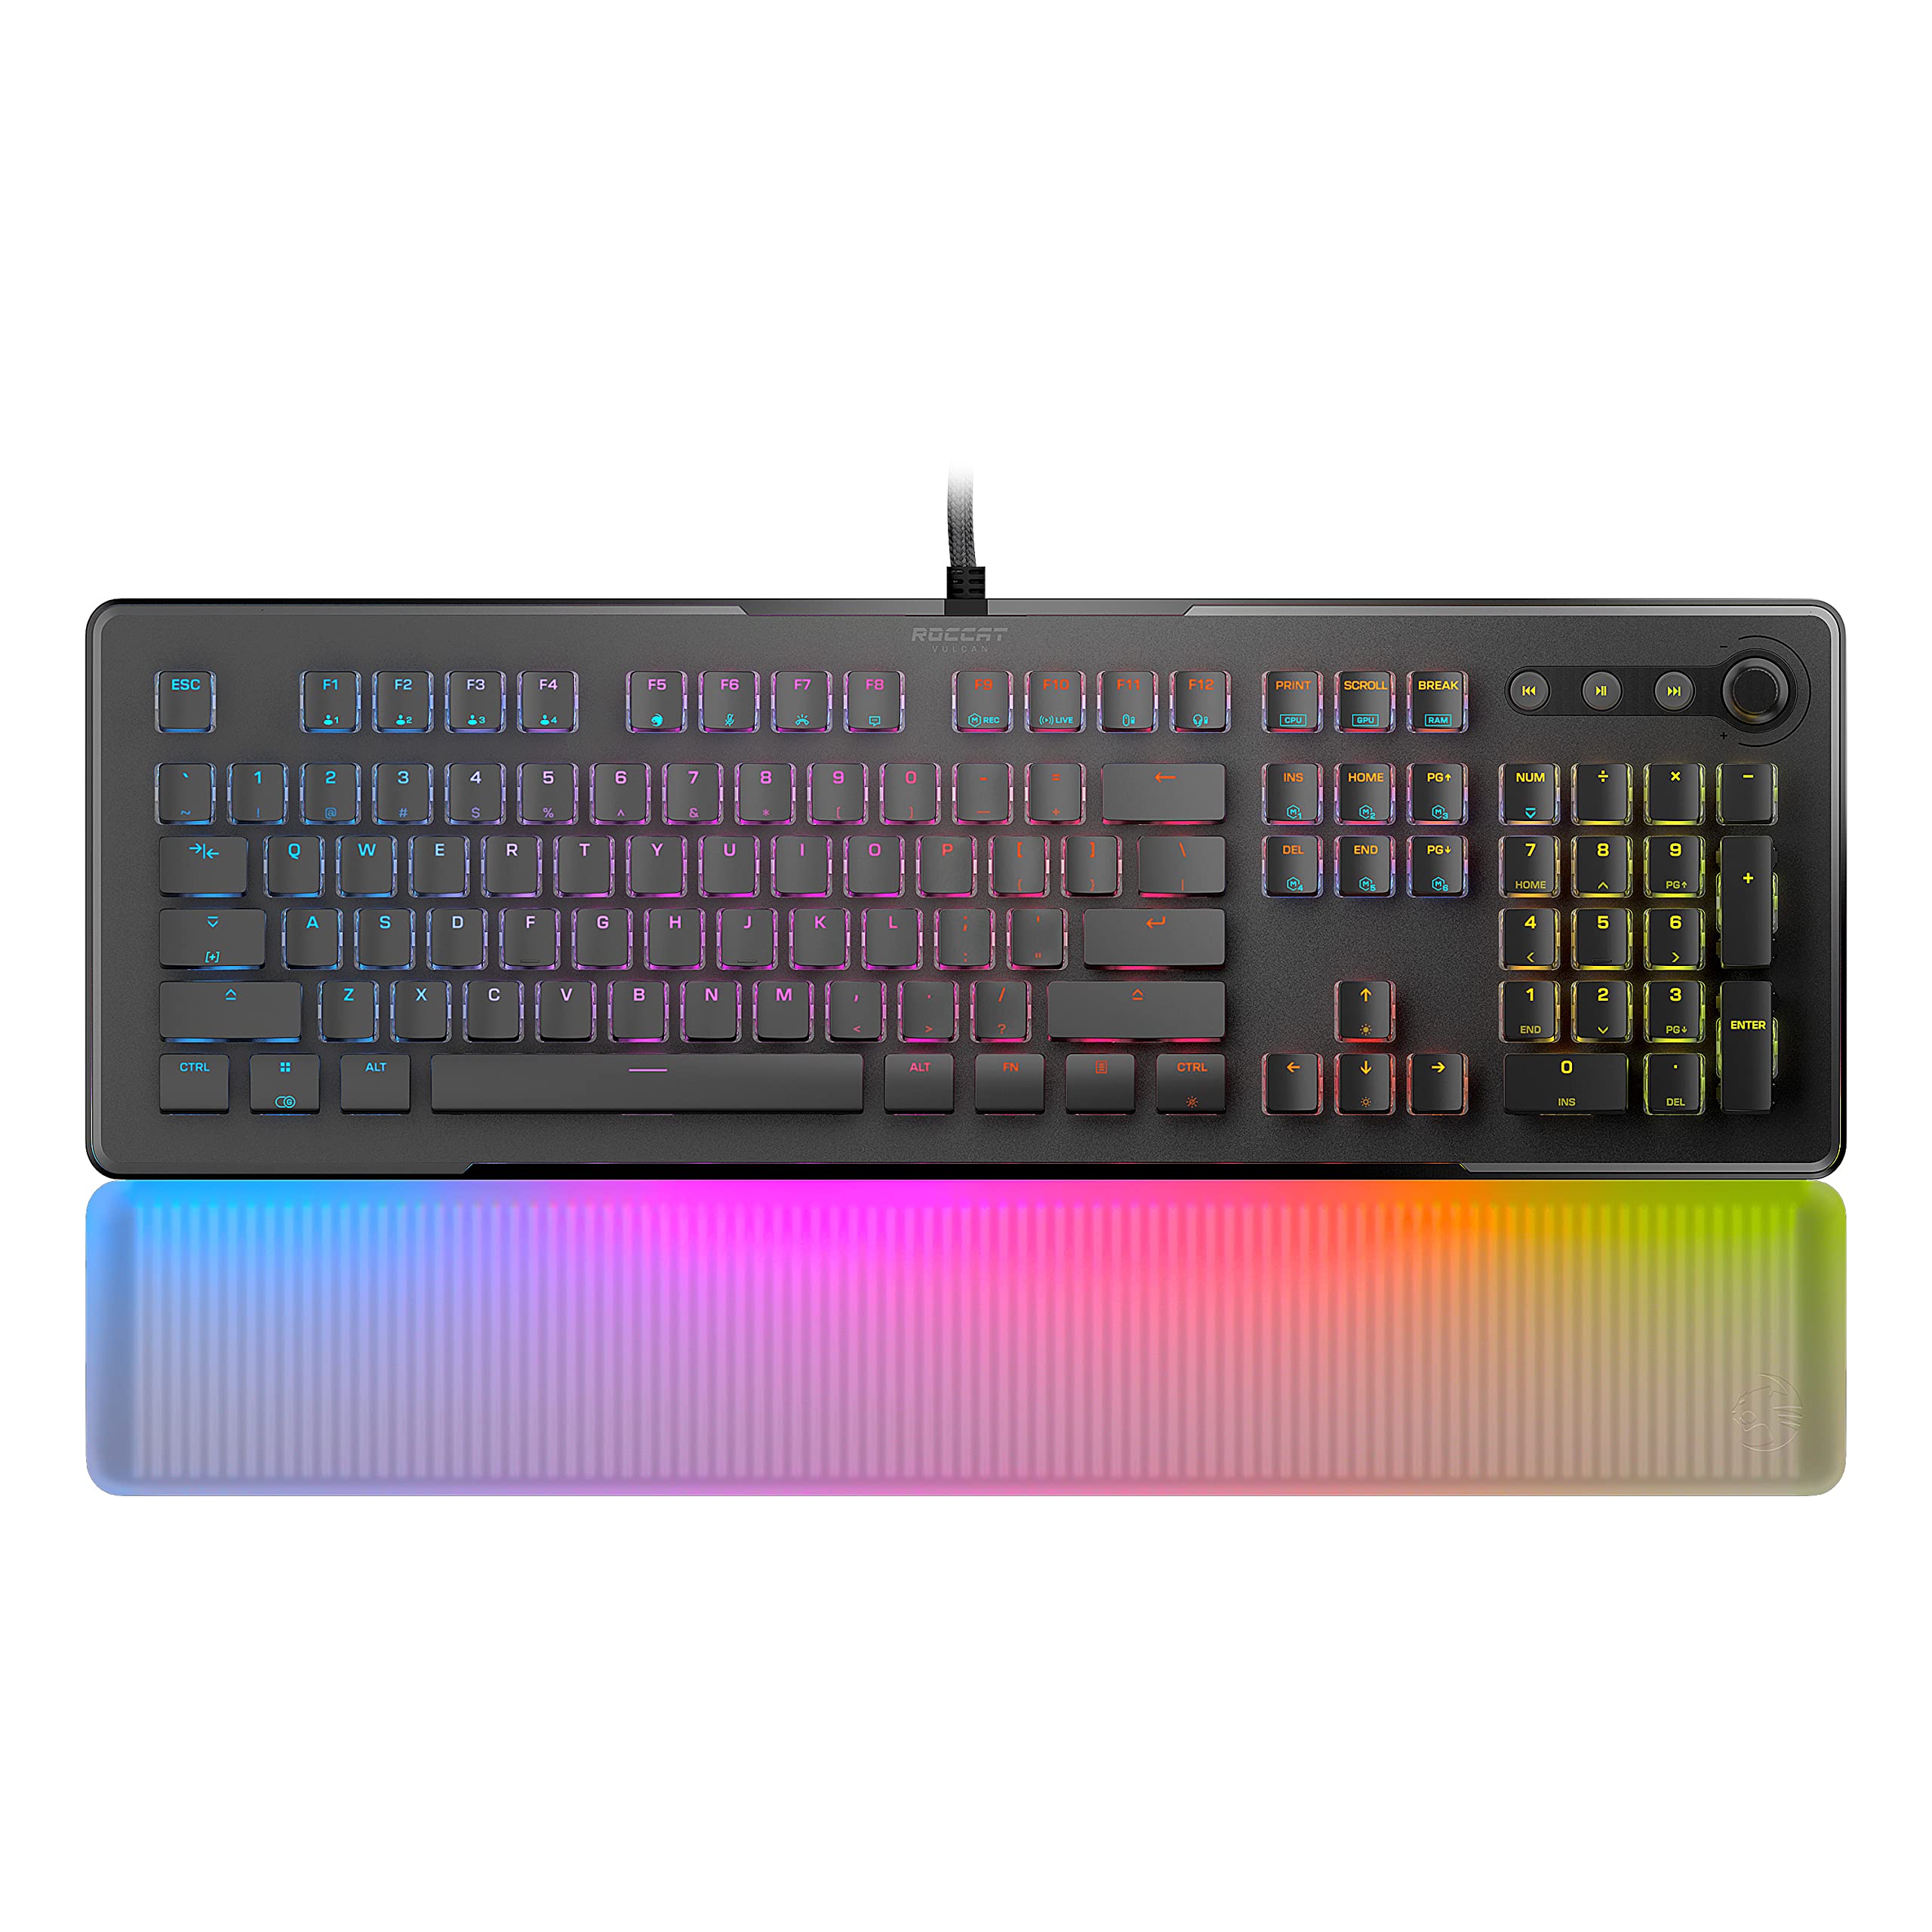 ROCCAT Vulcan II Max – Optical-Mechanical PC Gaming Keyboard with Customizable RGB Illuminated Keys and Palm Rest, Titan II Smooth Linear Switches, Aluminum Plate, 100M Keystroke Durability – Black